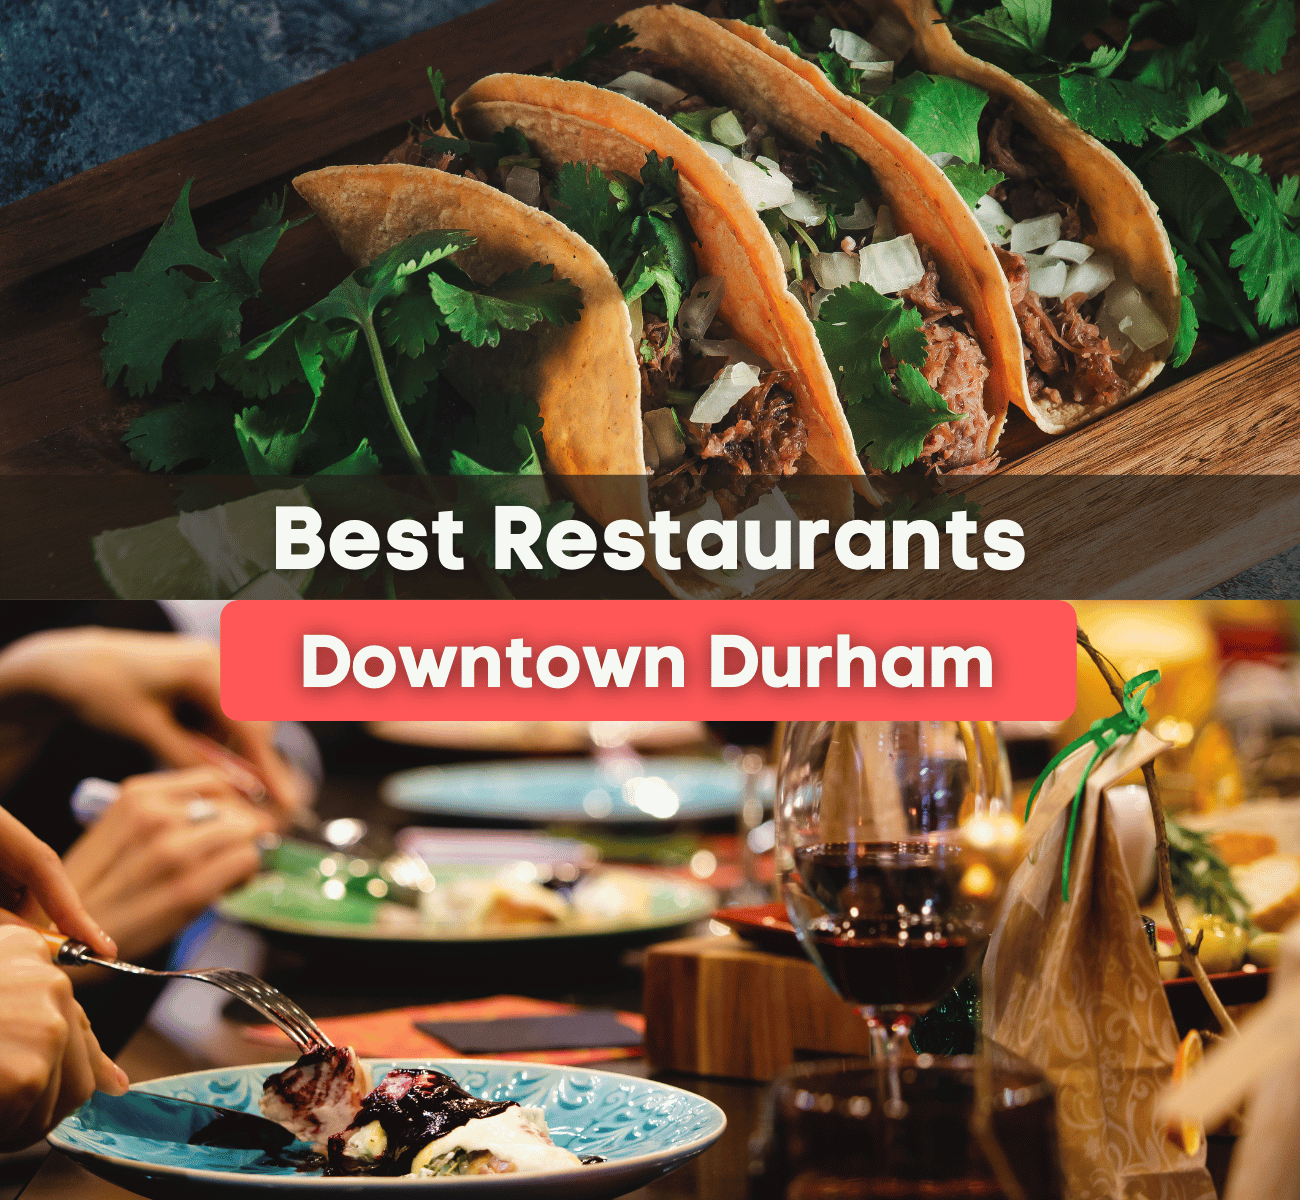 Best Restaurants in Downtown Durham, NC - where are the best places to eat in Downtown Durham?